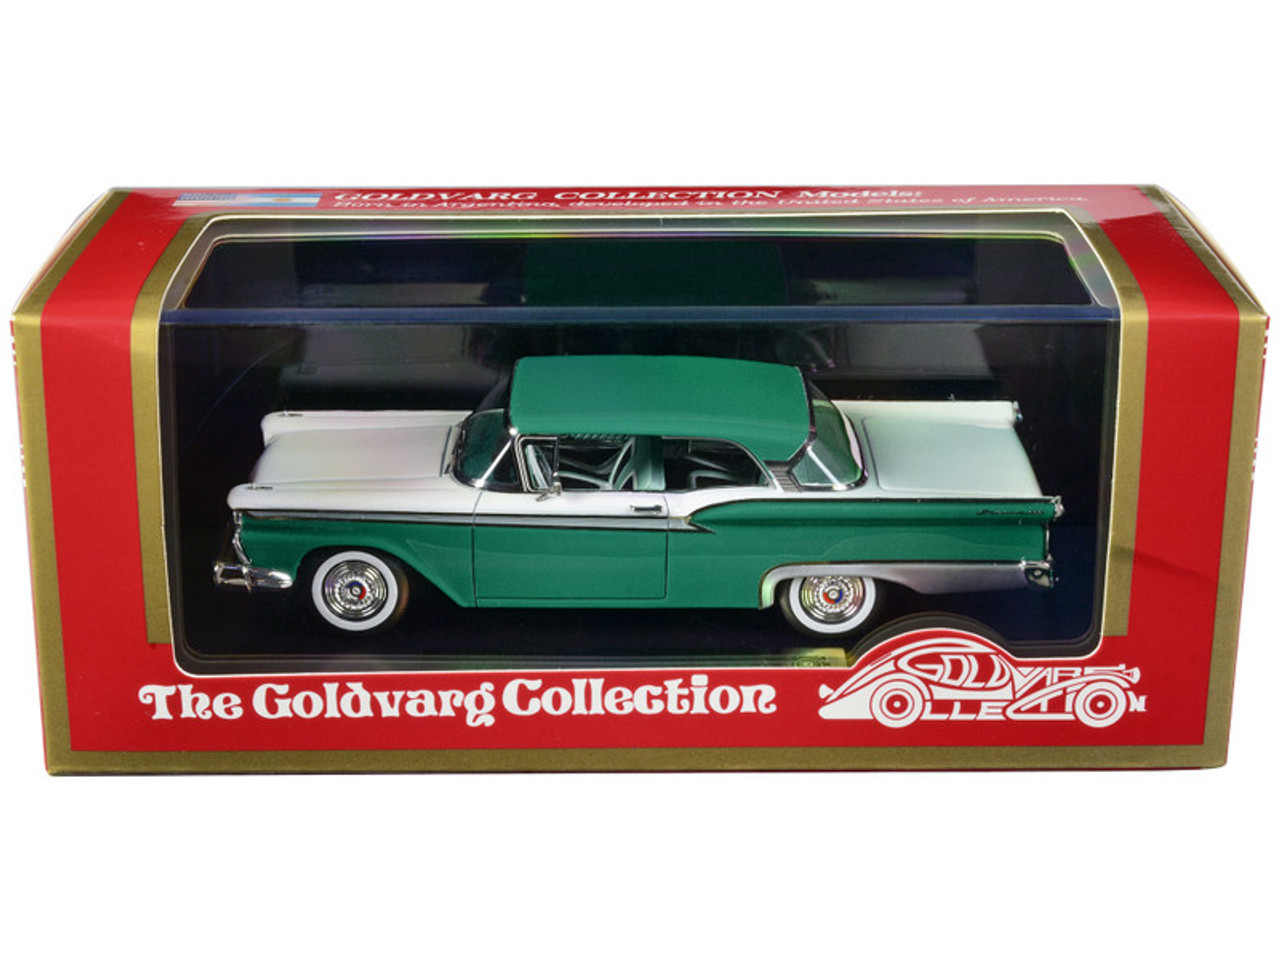 1959 Ford Fairlane 500 Indian Turquoise and White with Light Green Interior Limited Edition to 240 pieces Worldwide 1/43 Model Car by Goldvarg Collection